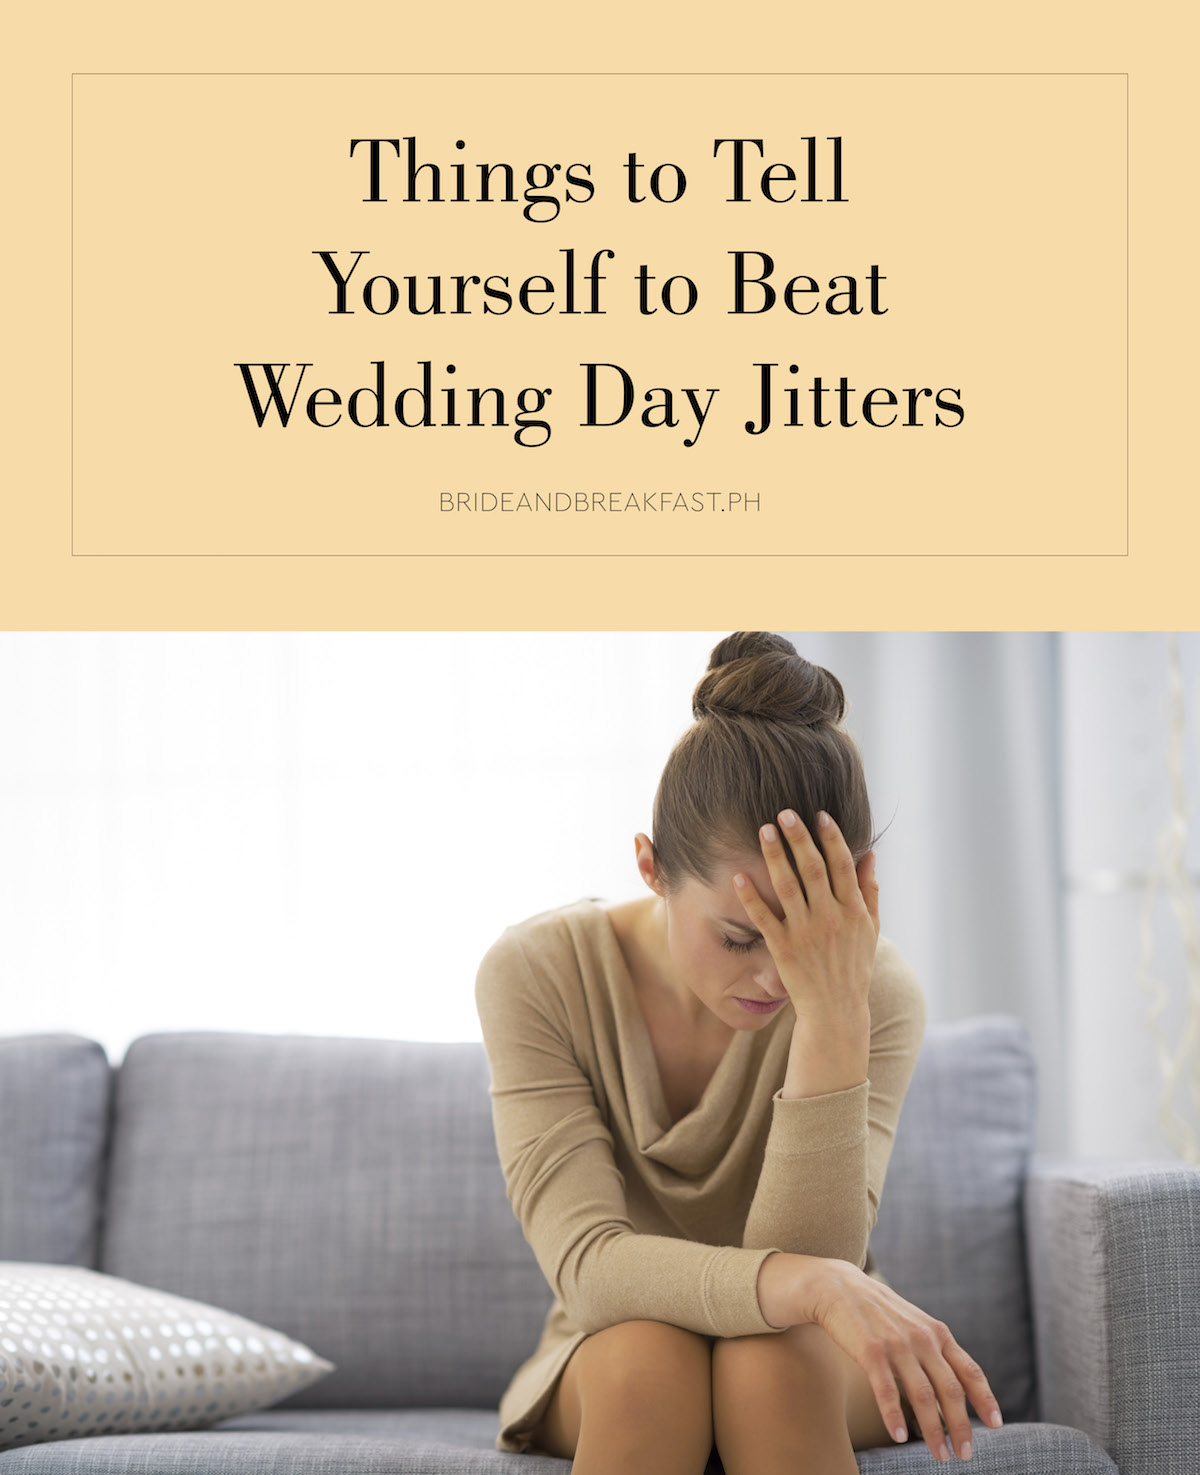 Things to Tell Yourself to Beat Wedding Day Jitters